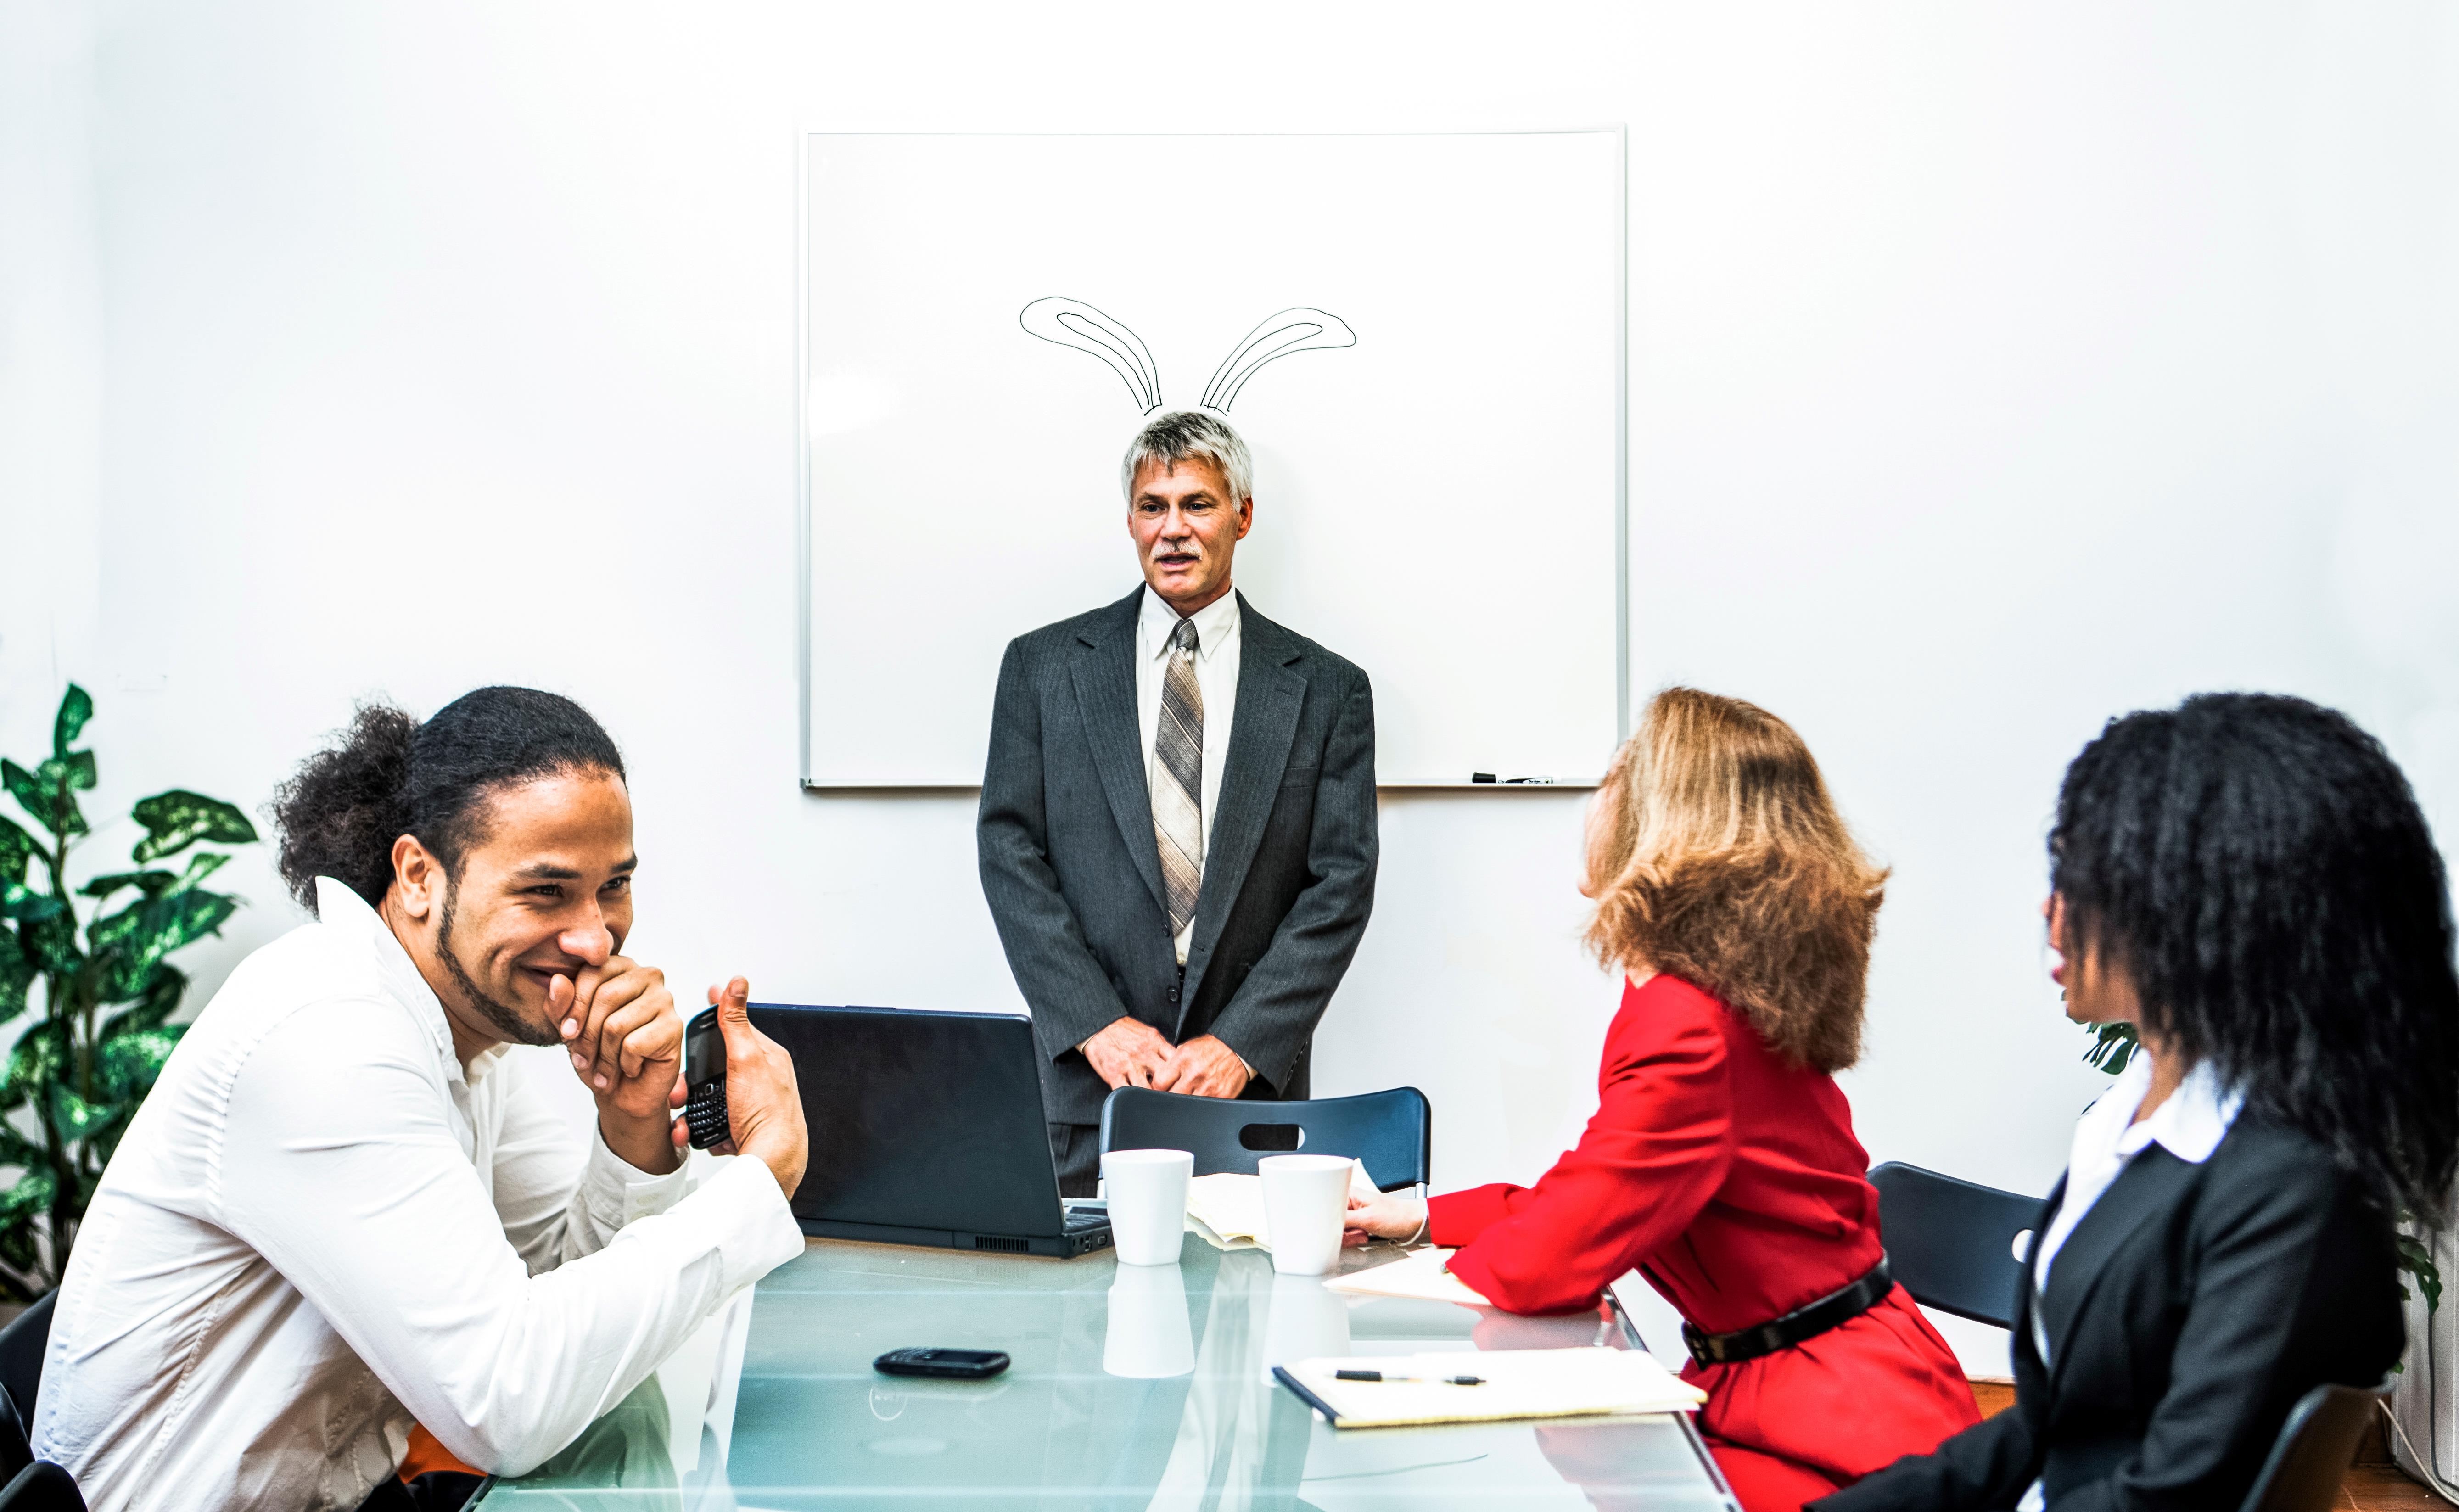 Office workers laughing whilst team leader stands in front of white board with bunny ears behind him